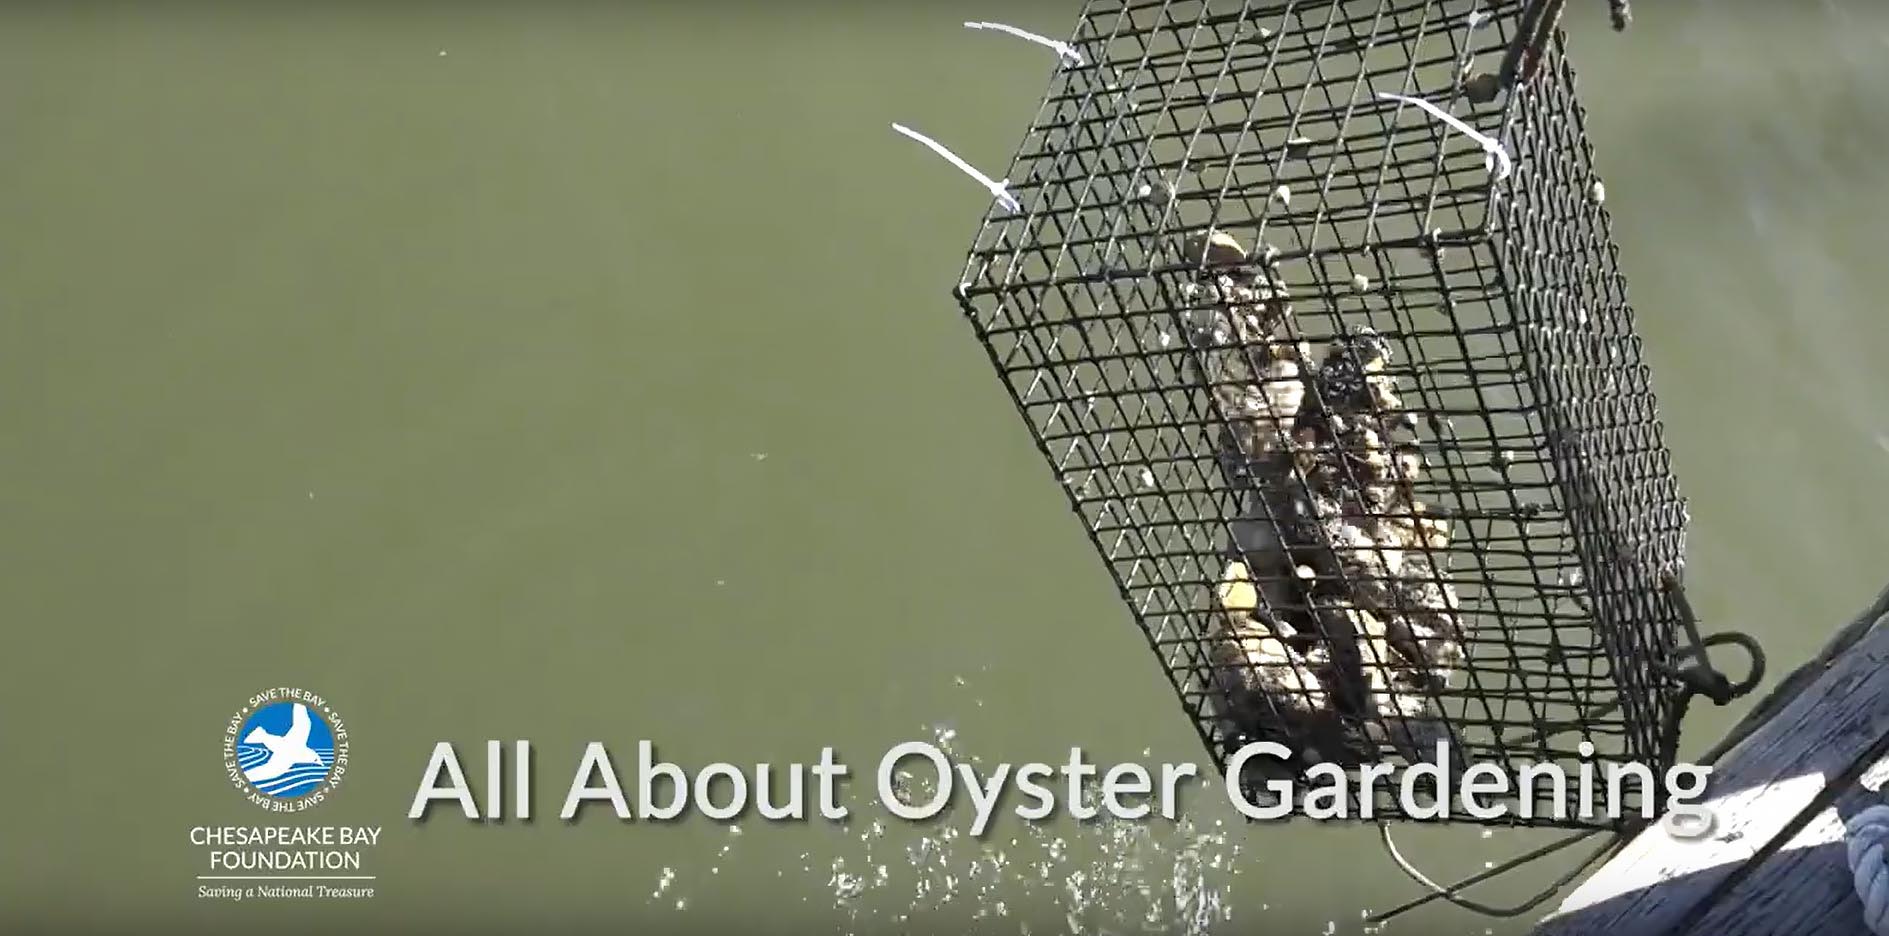 Screen capture from the beginning of a video showing an oyster cage being pulled from the water with the CBF logo and headline All About Oyster Gardening.